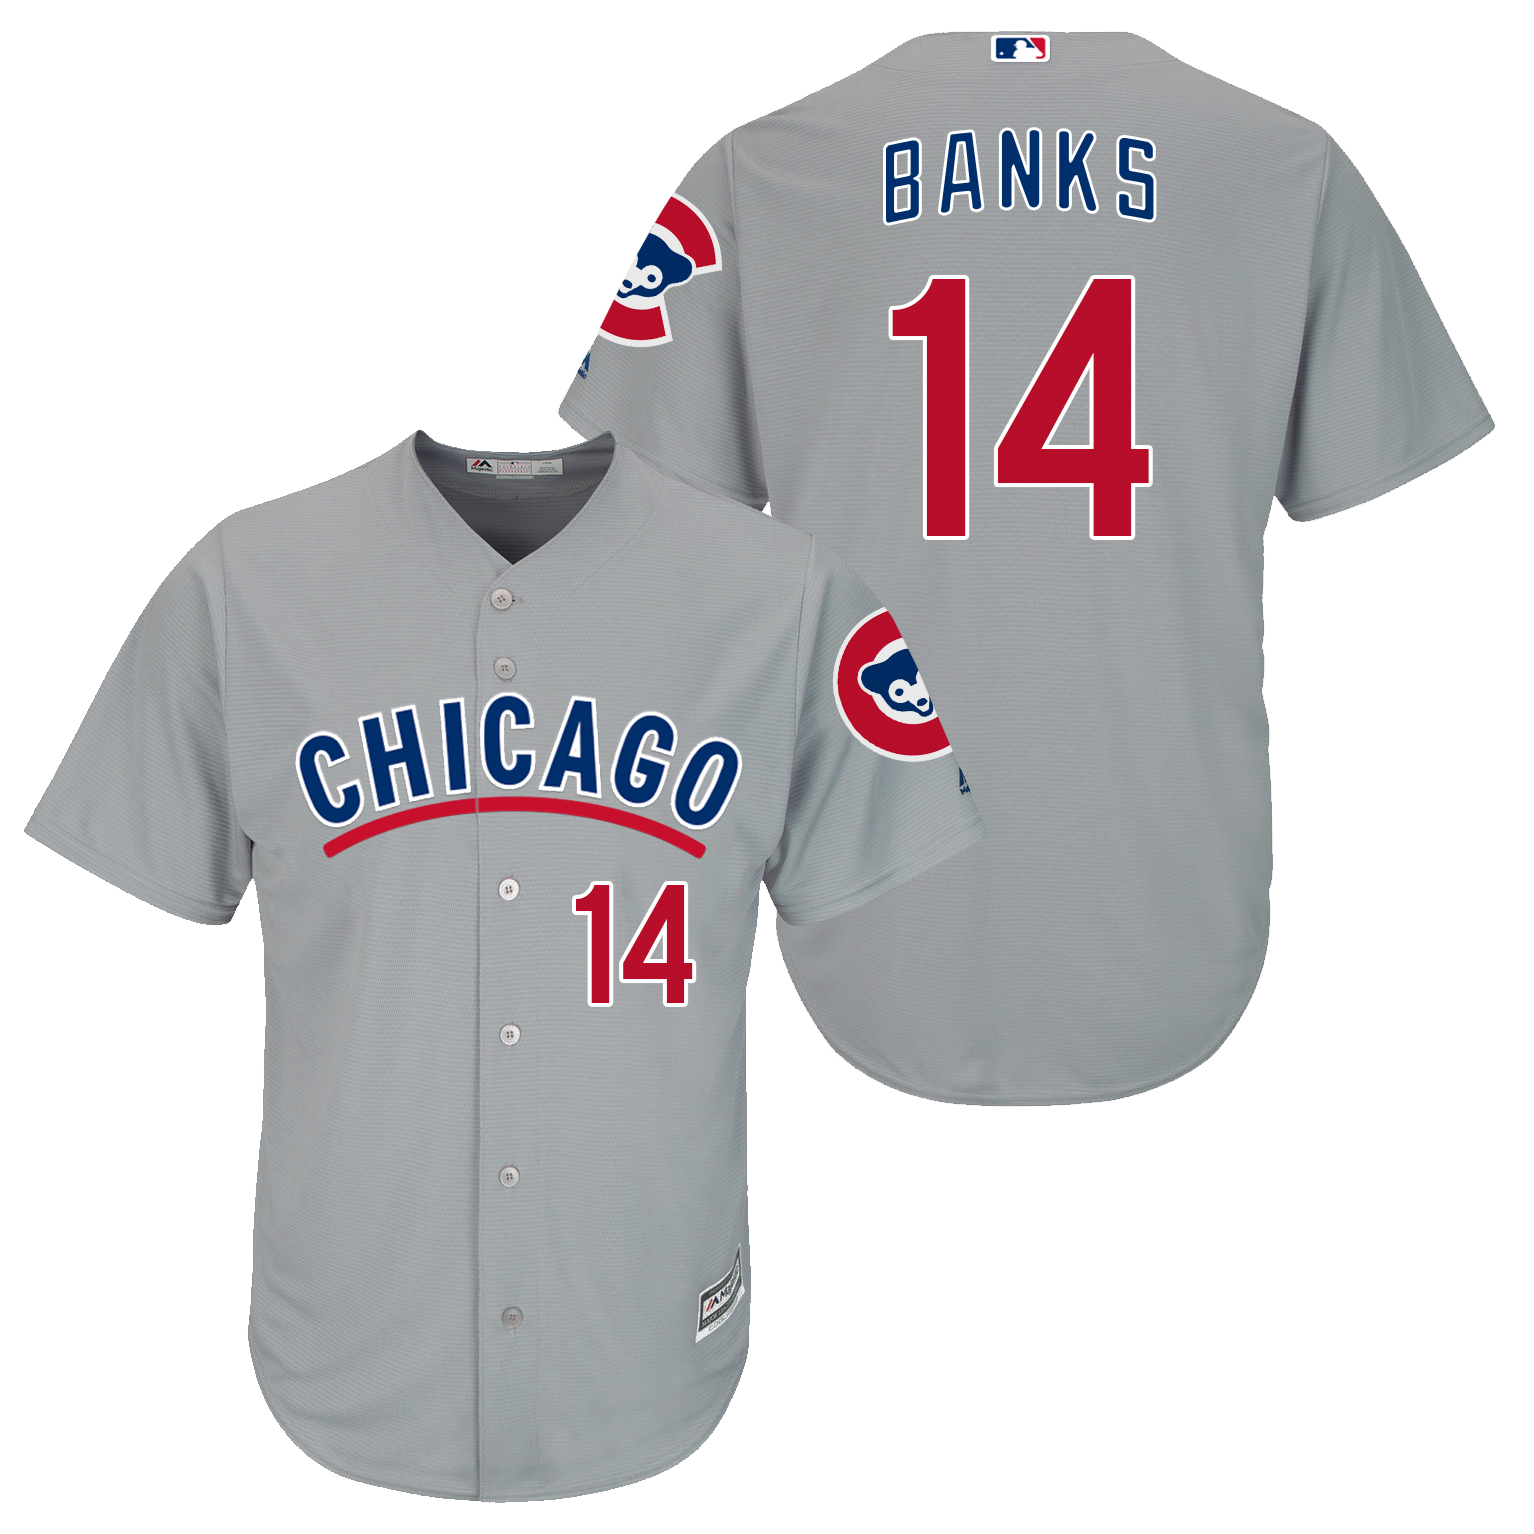 Cubs 14 Ernie Banks Grey New Cool Base Jersey